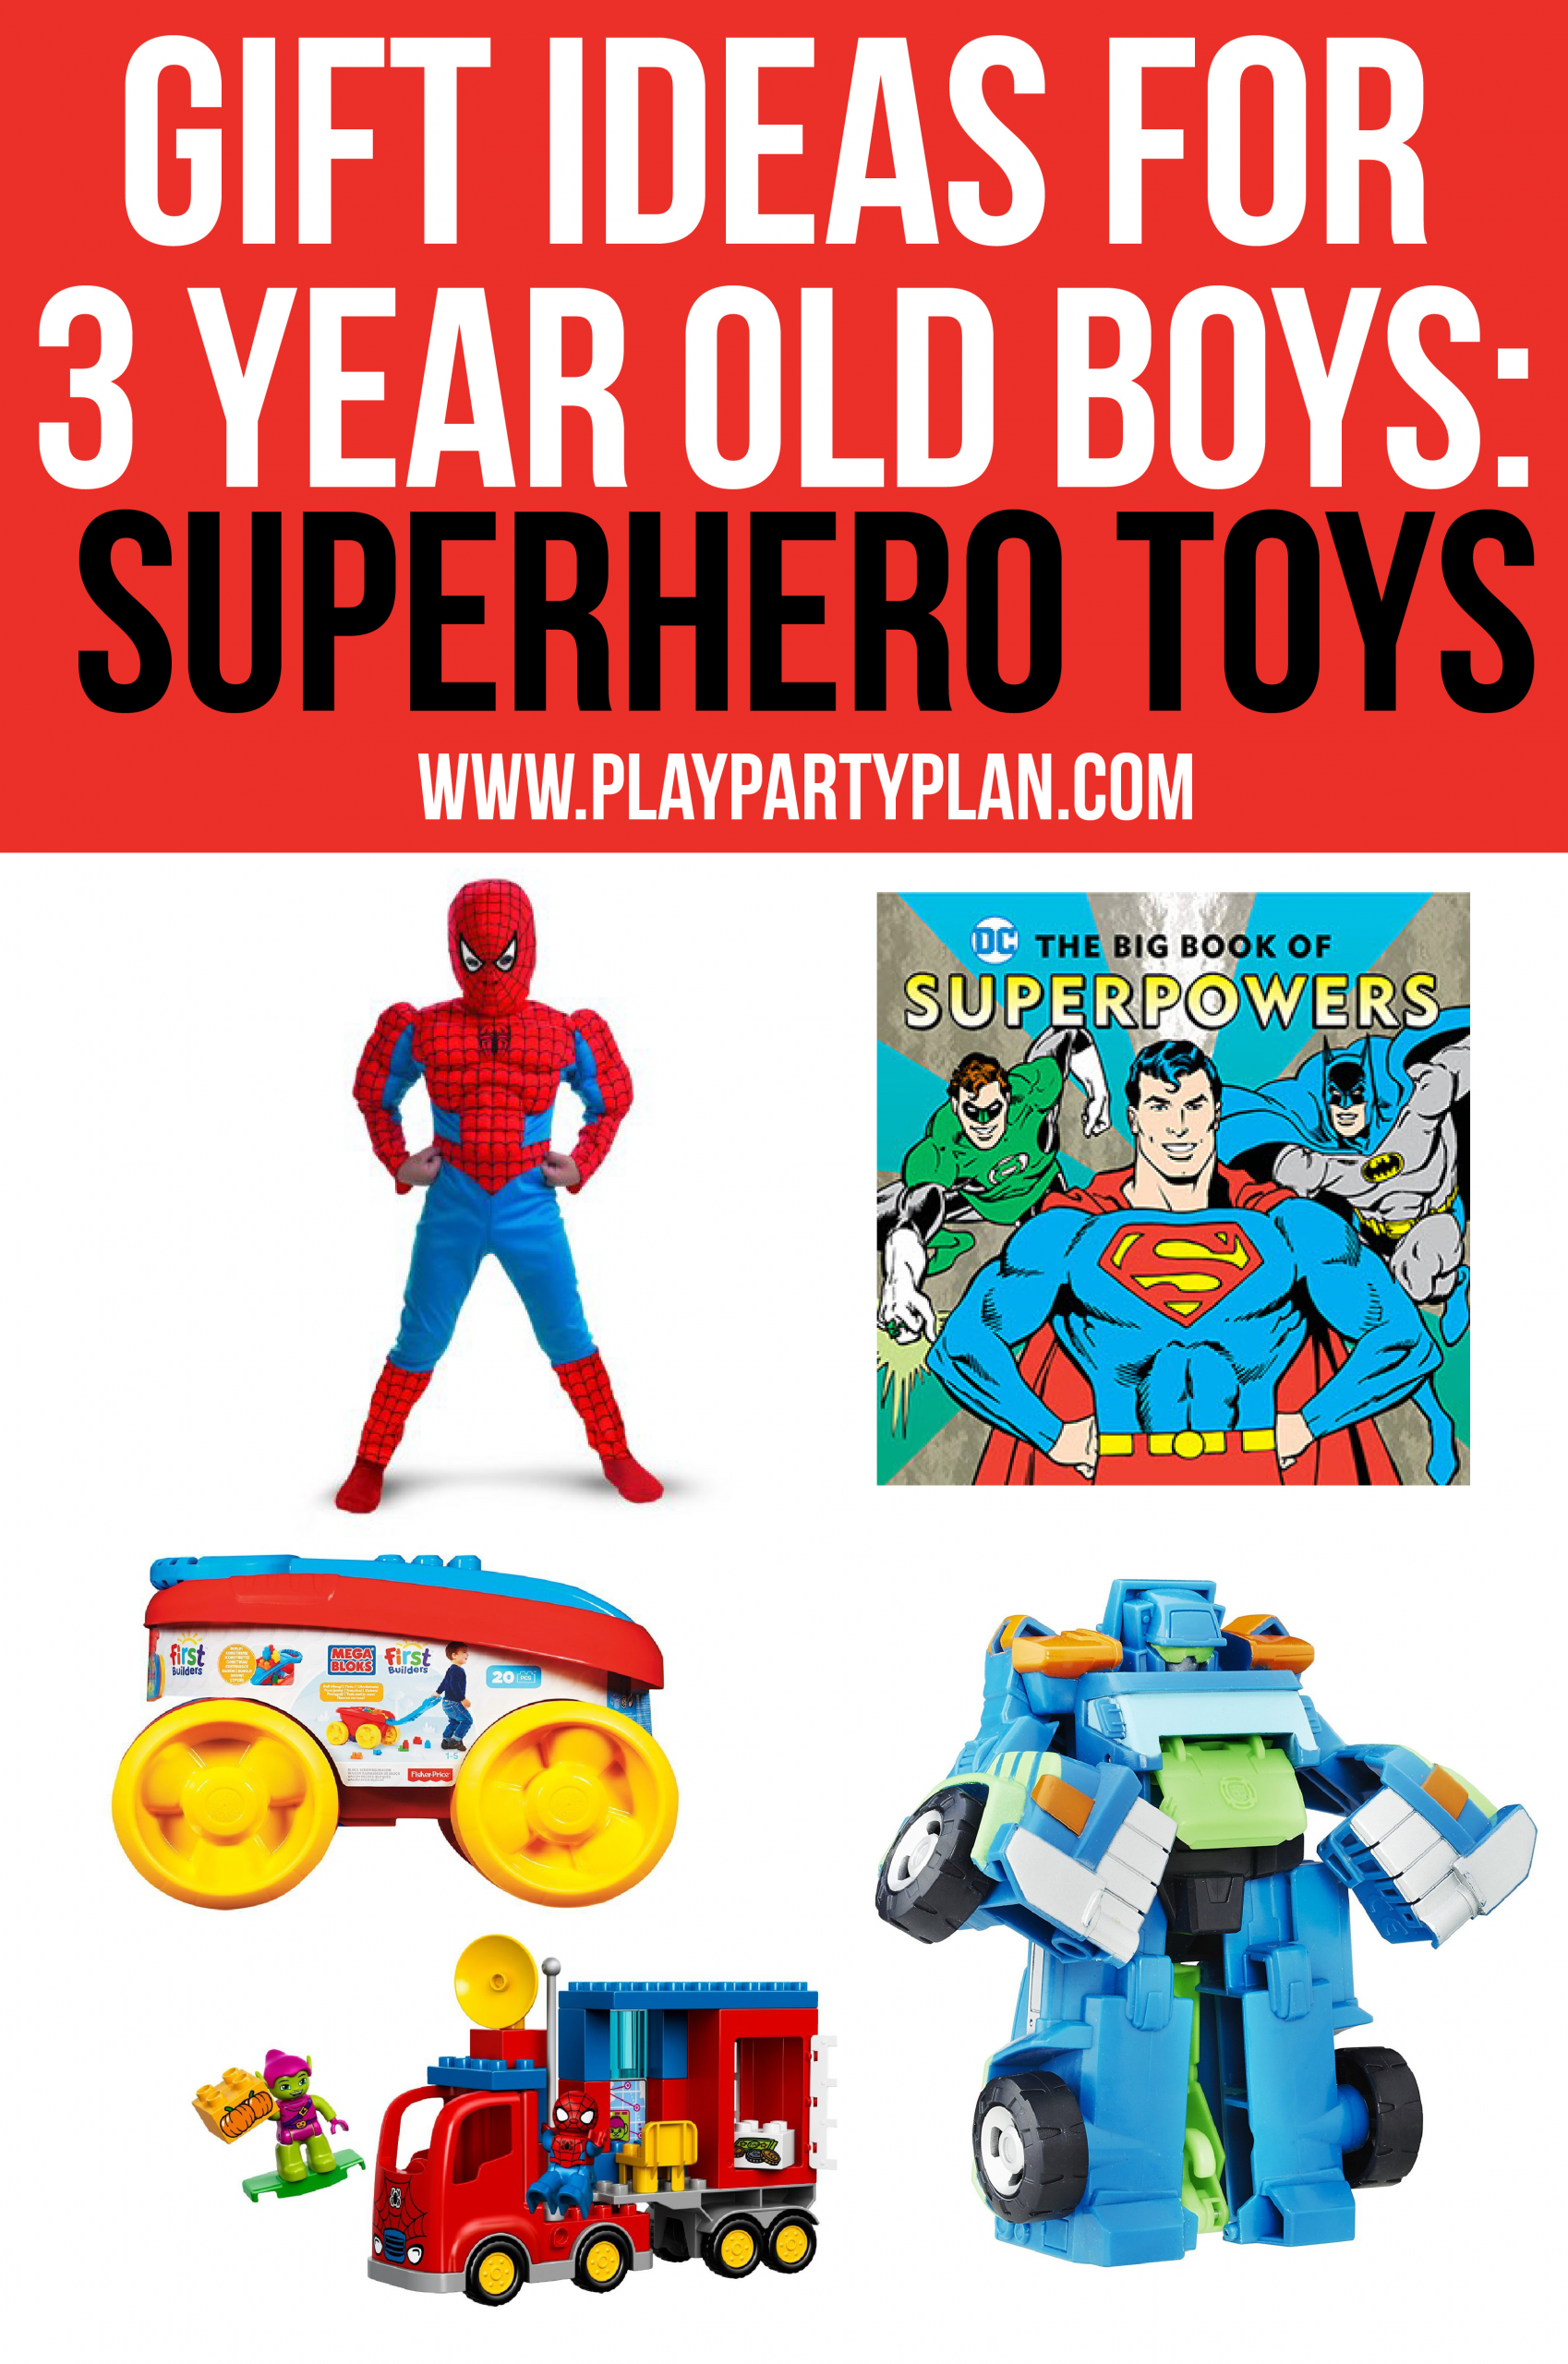 3 Year Old Gift Ideas Boys
 The ultimate list of t ideas for a 3 year old boy